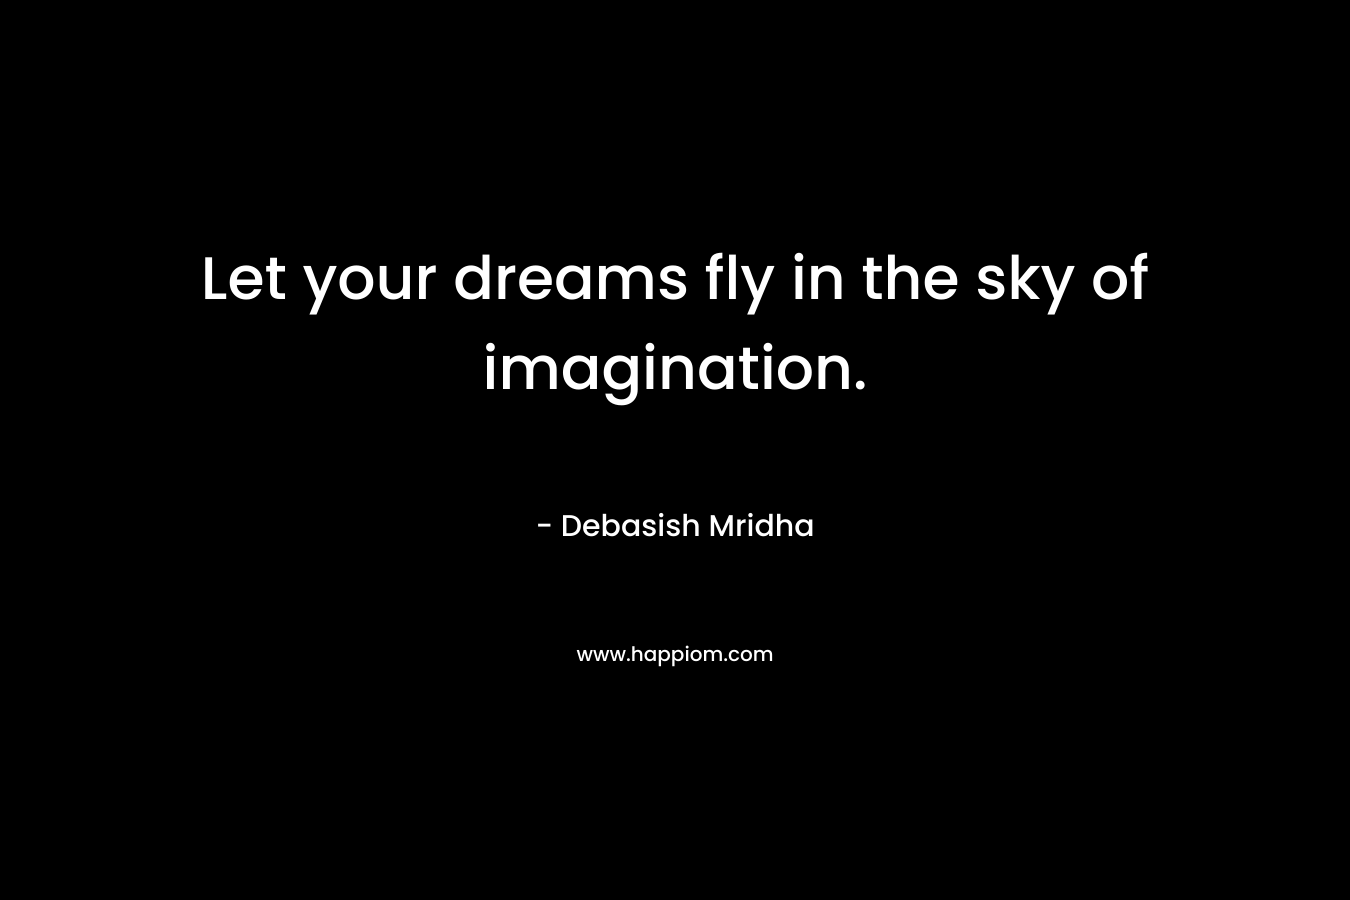 Let your dreams fly in the sky of imagination.